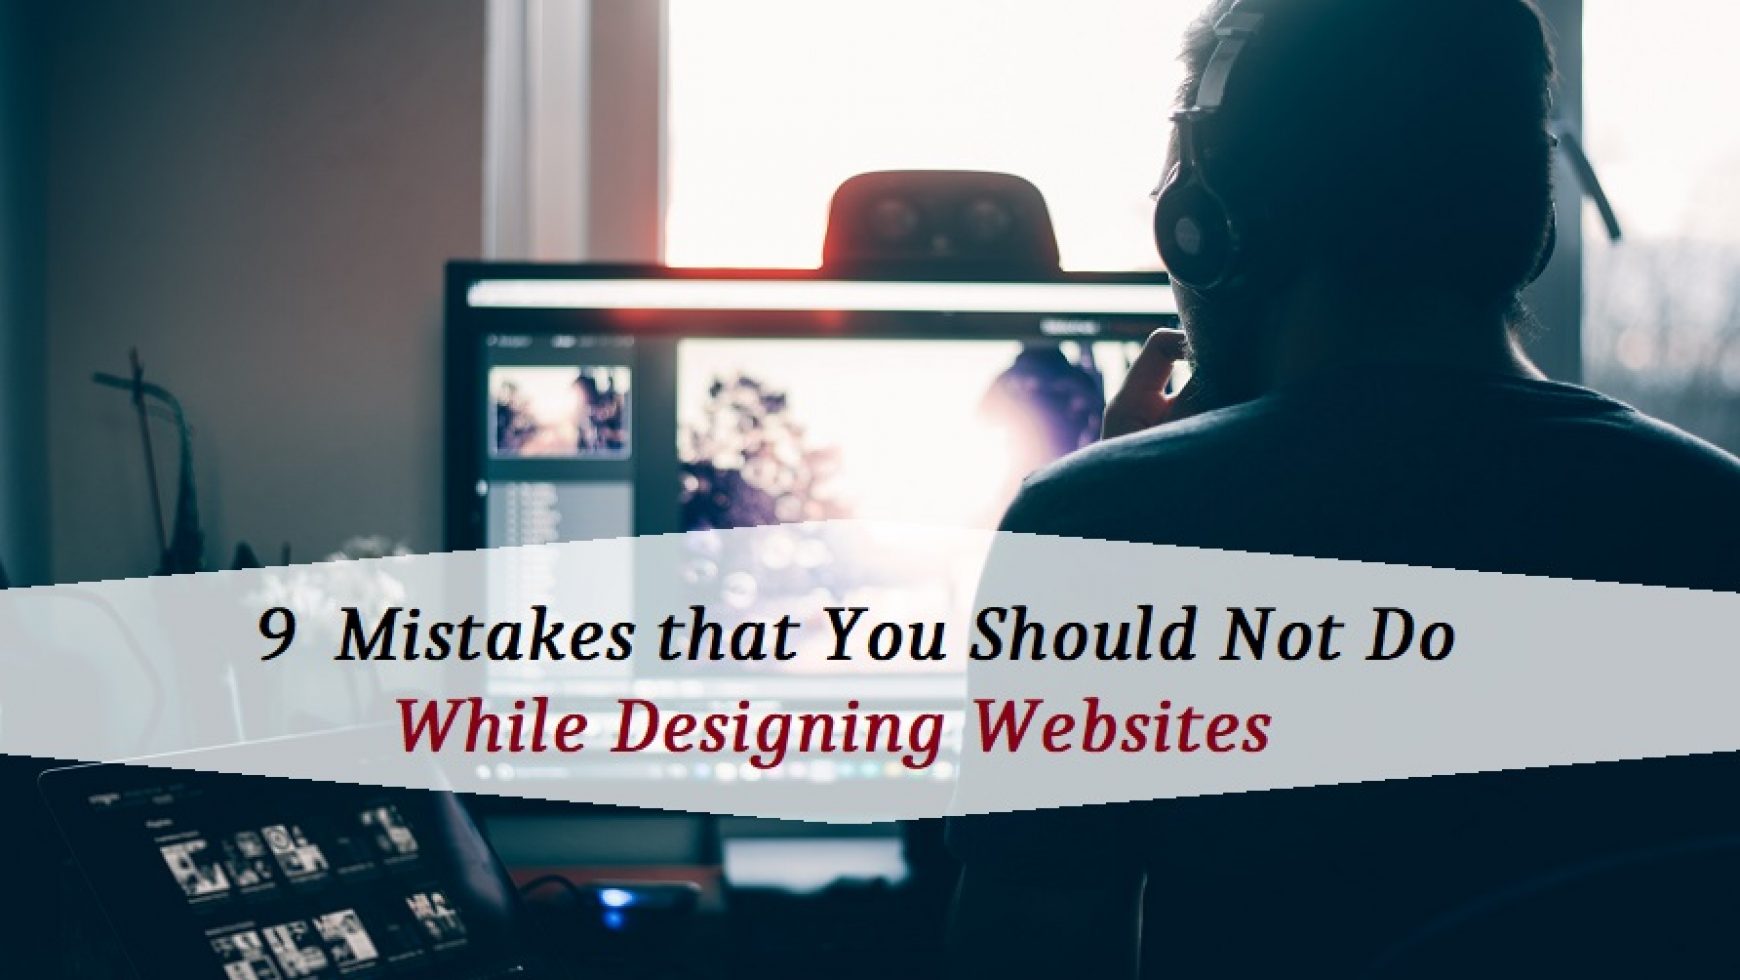 9 Mistakes that You Should Not Do While Designing Websites